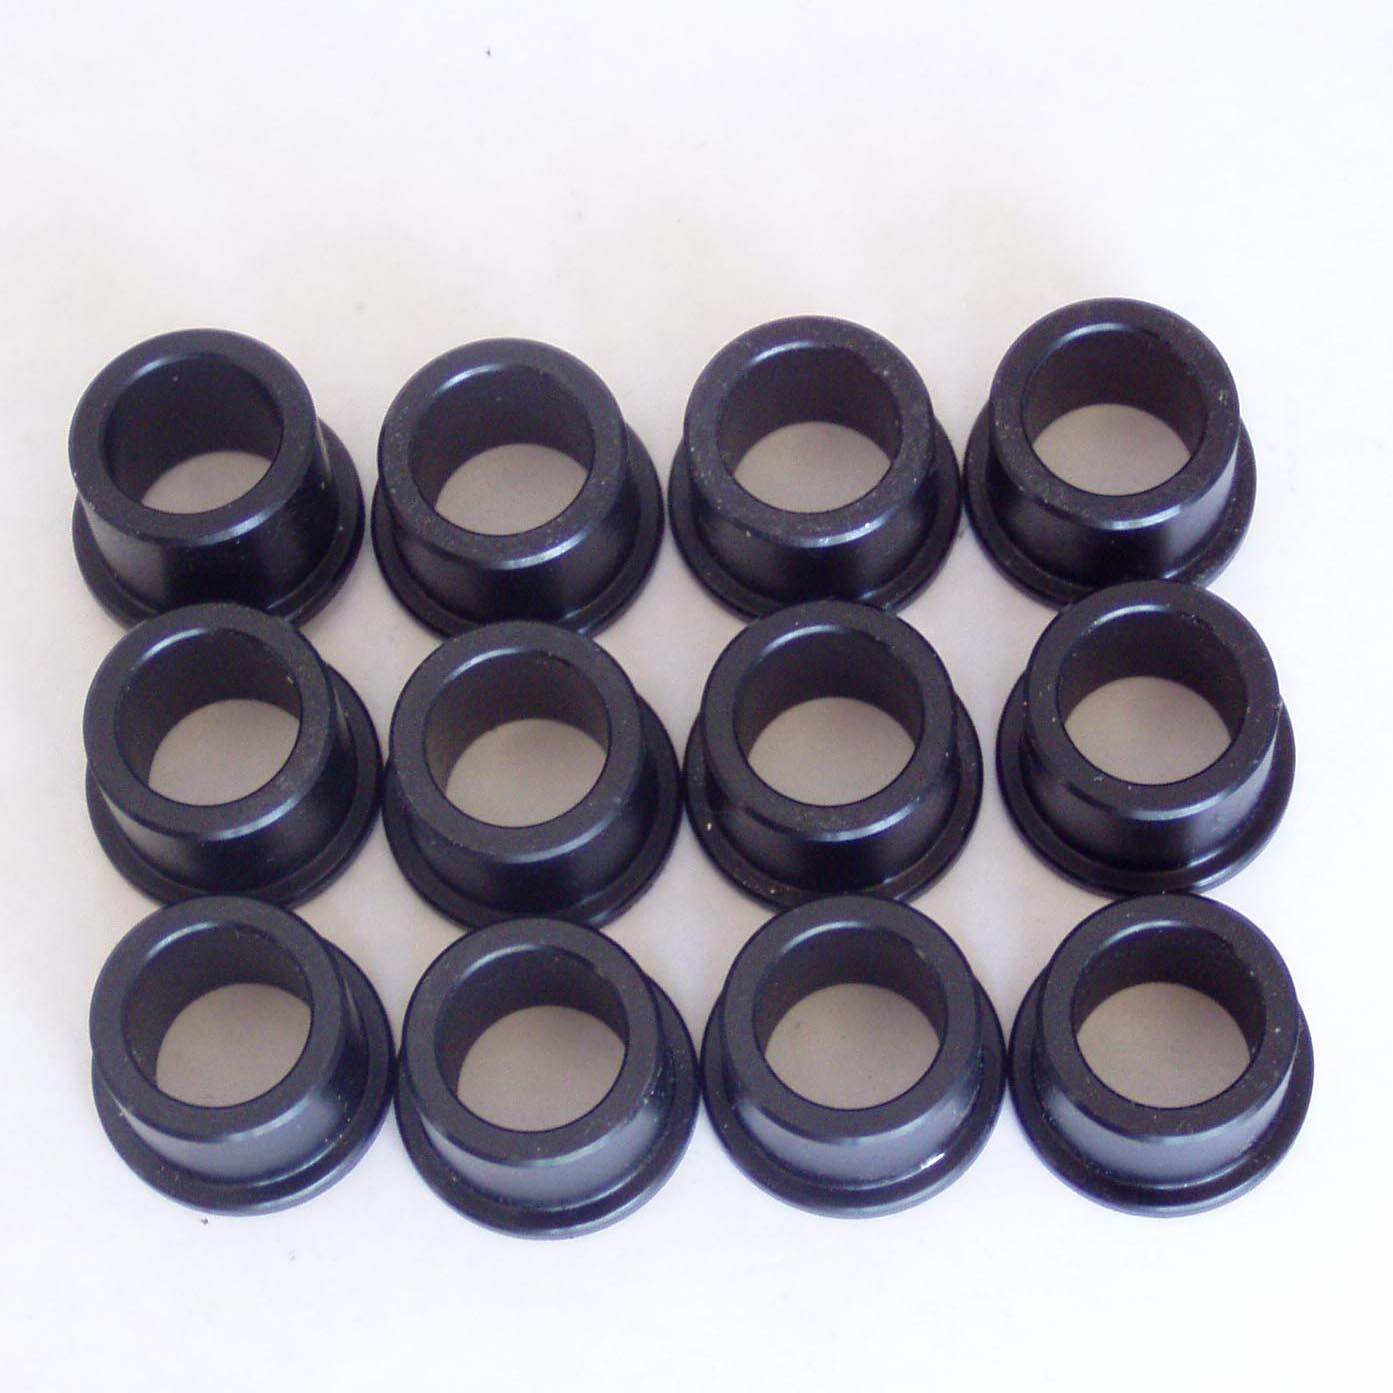 Modquad A-Arm Bushing Replacement Set, Delrin, 6pc or 12pc *NEW*